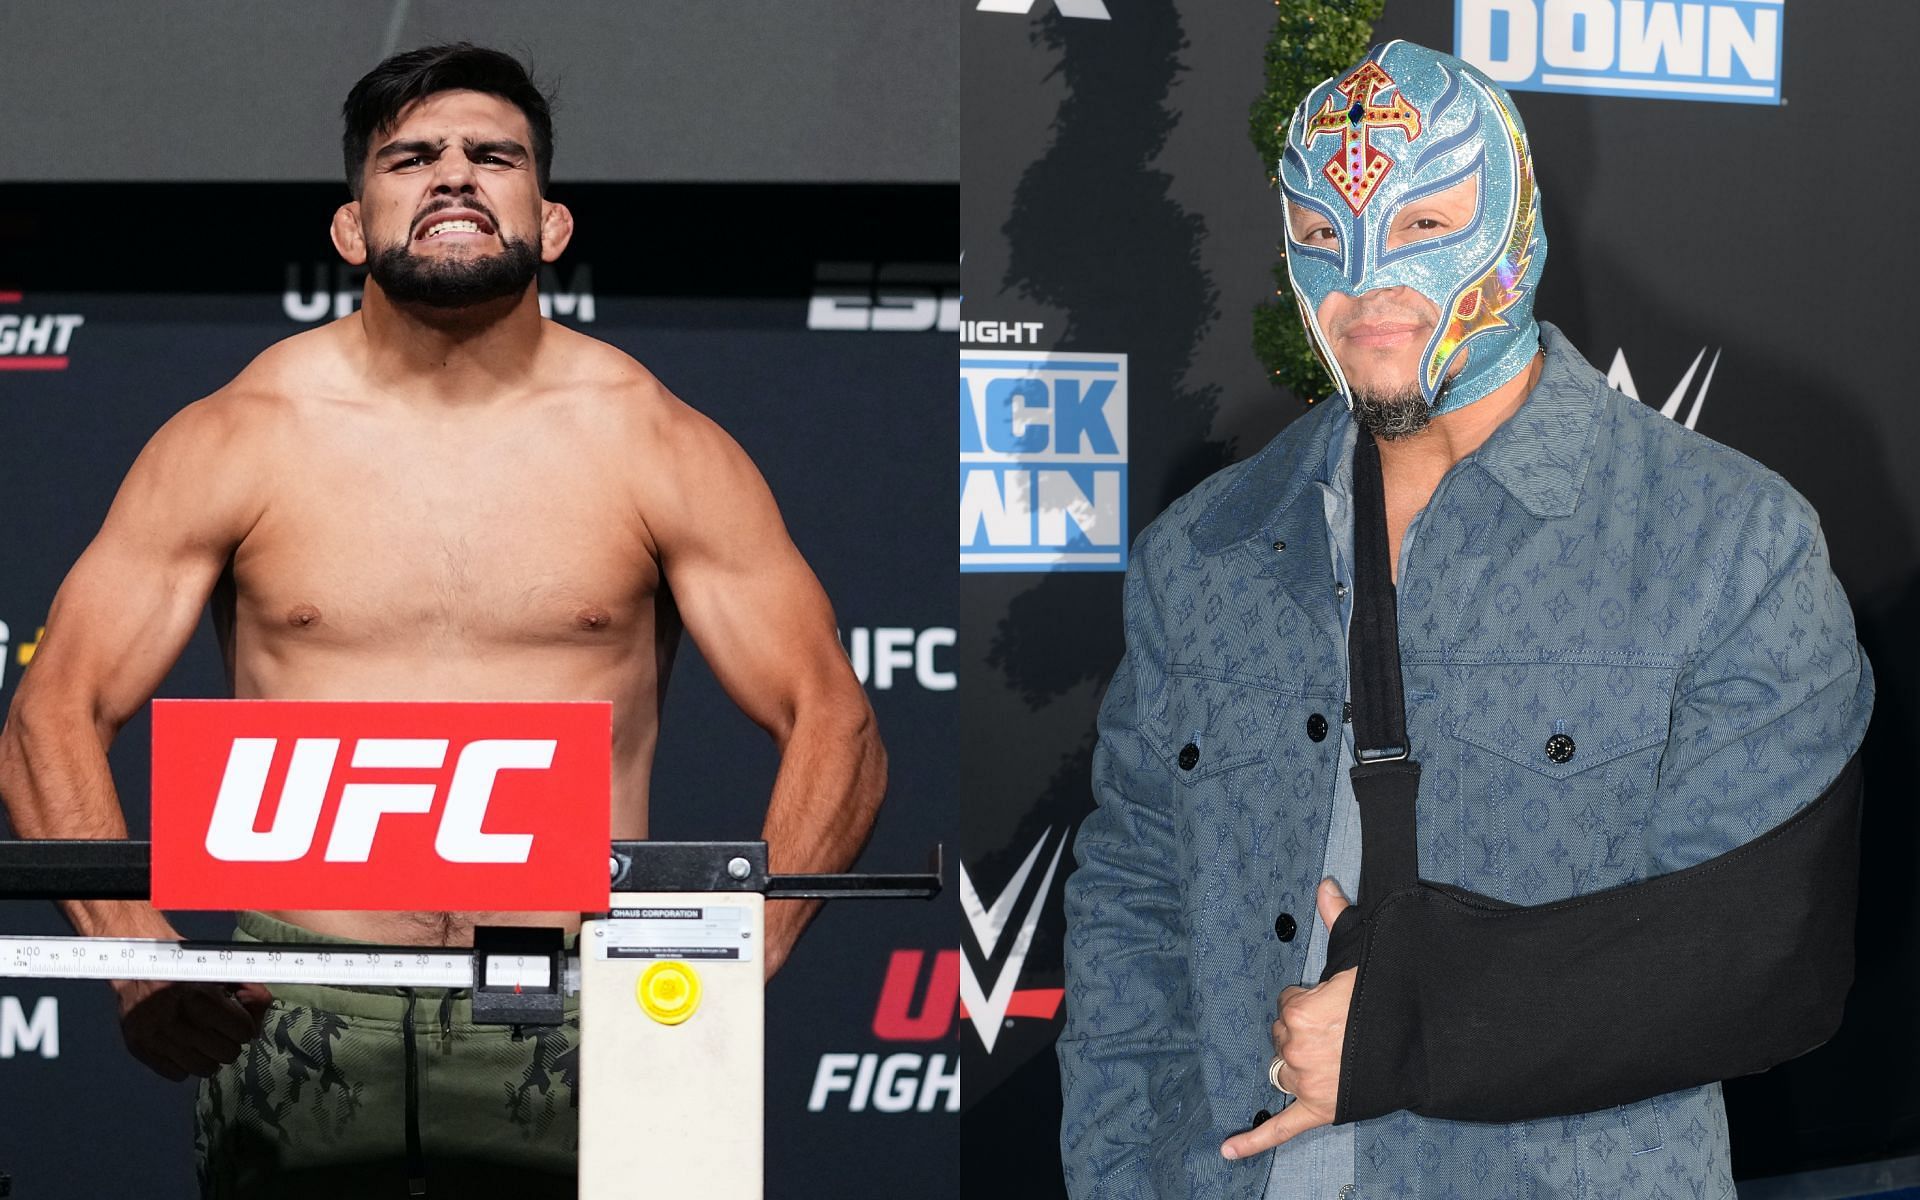 Kelvin Gastelum and Rey Mysterio [Image credits: Getty Images]